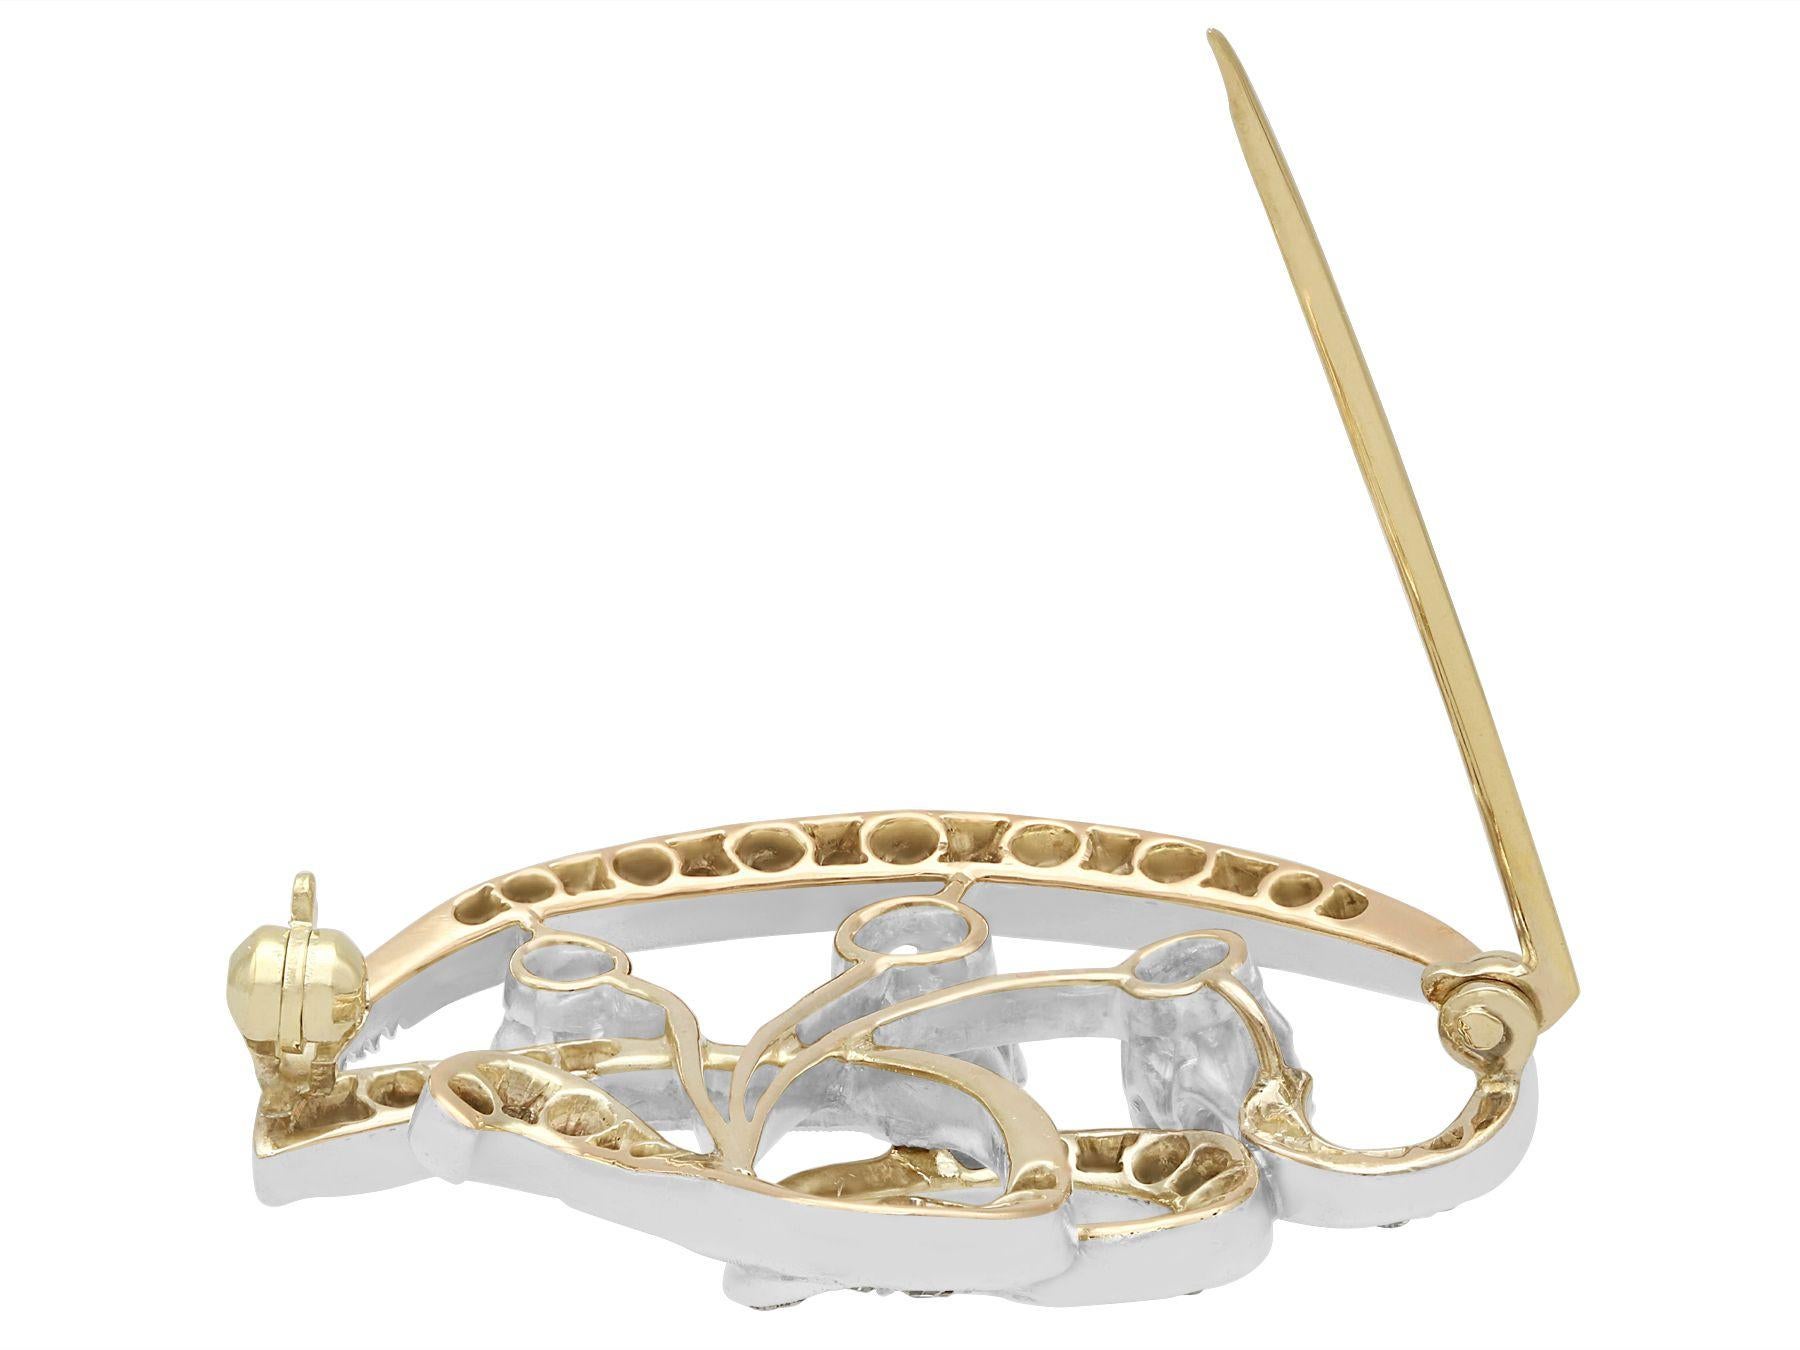 Antique 2.25 Carat Diamond and Yellow Gold Brooch, circa 1890 For Sale 1